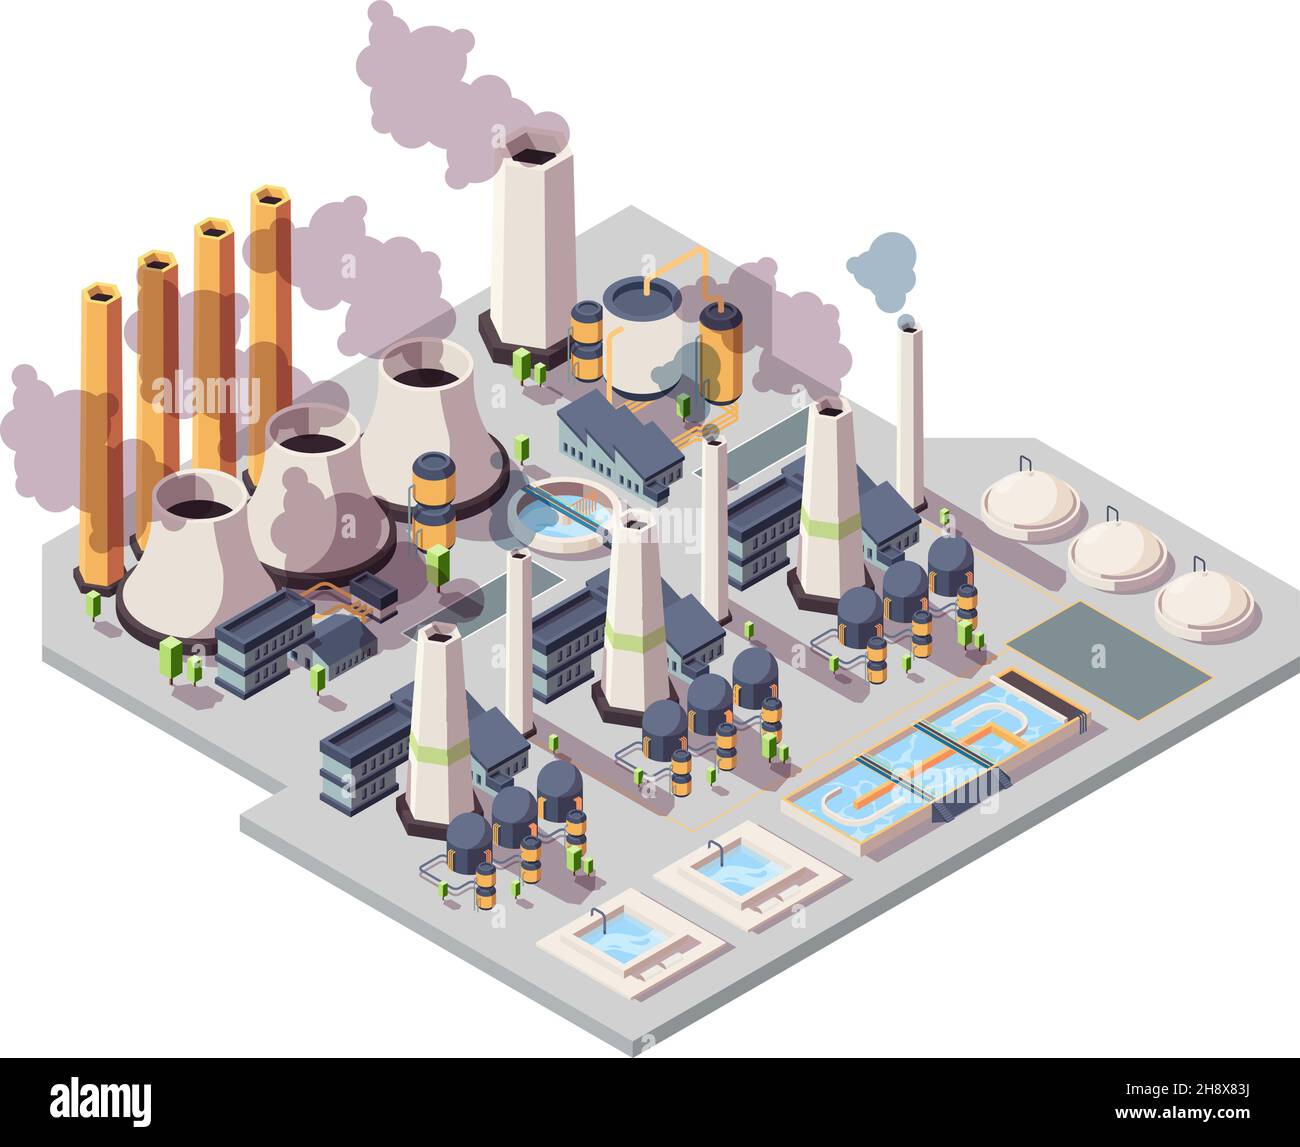 Power nuclear factory. Energy plant isometric environment 3d industrial buildings vector illustrations Stock Vector